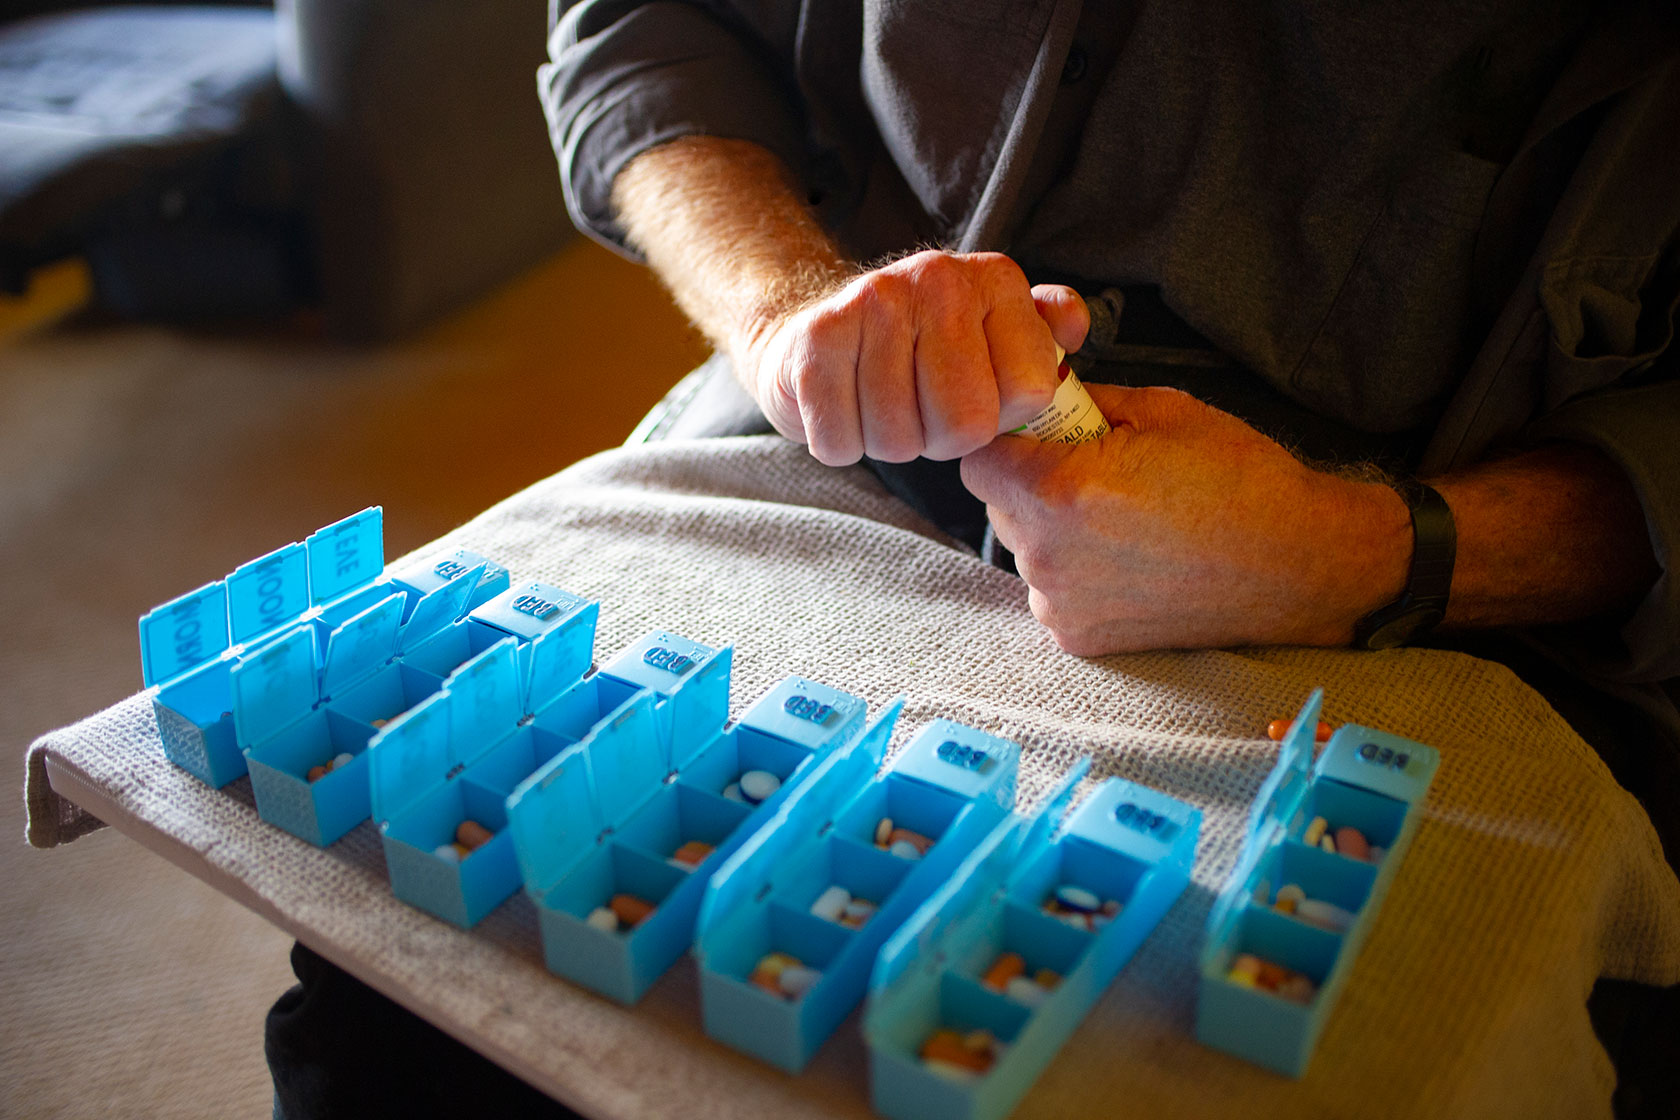 Photo shows a closeup of a person's hands opening a bottle of pills, with a blue pill organizer sitting in front of them